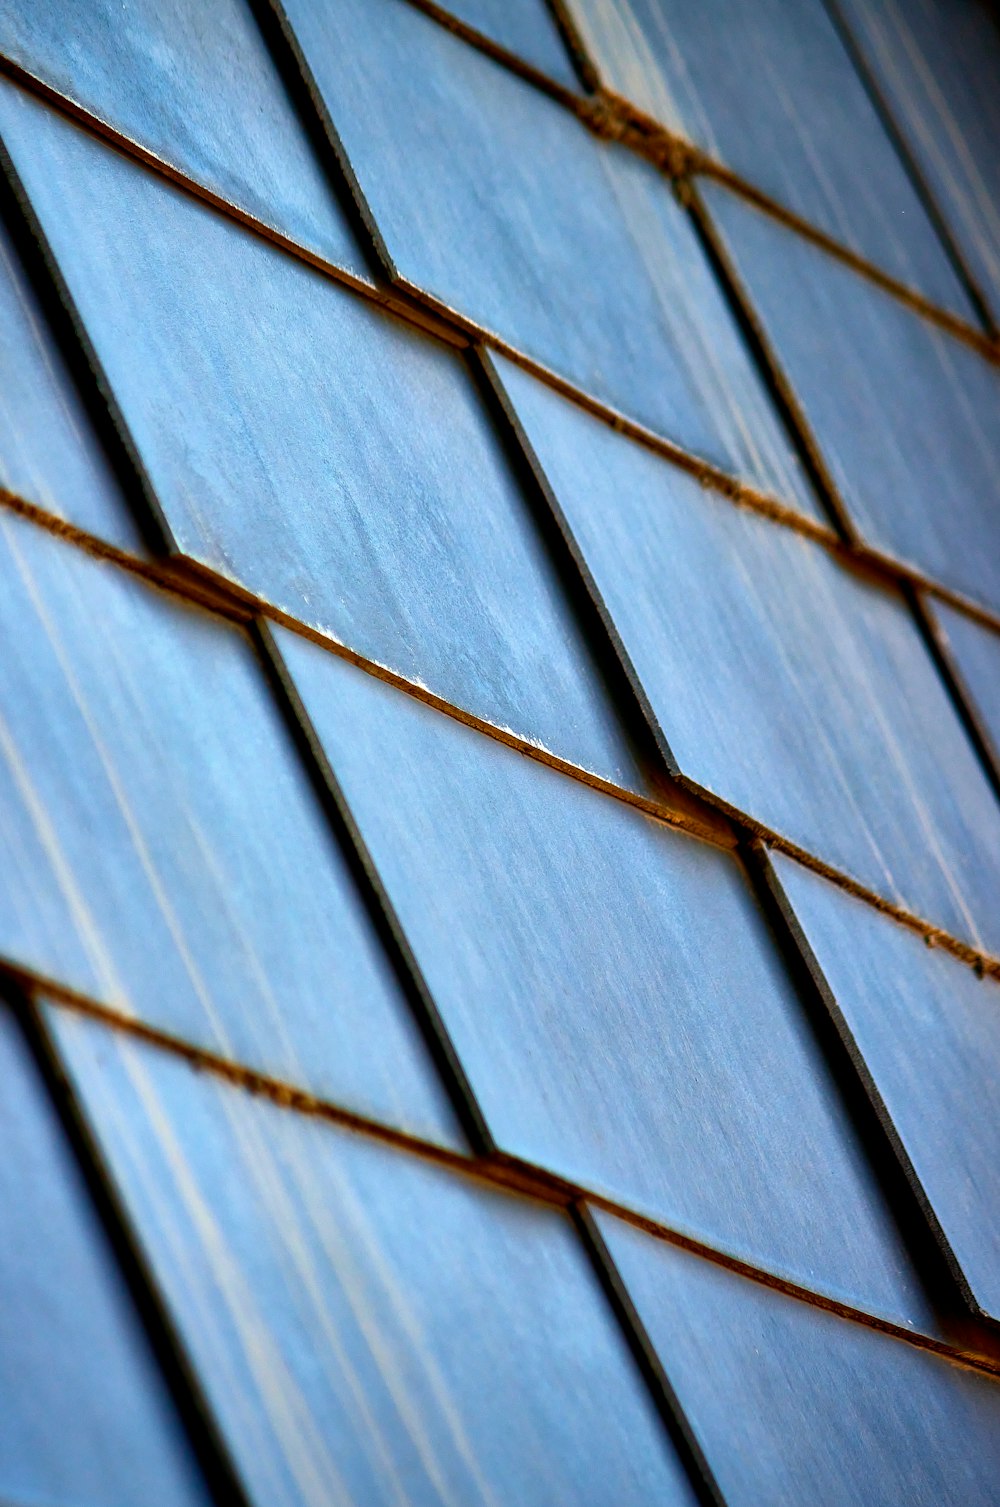 a close up view of a blue roof